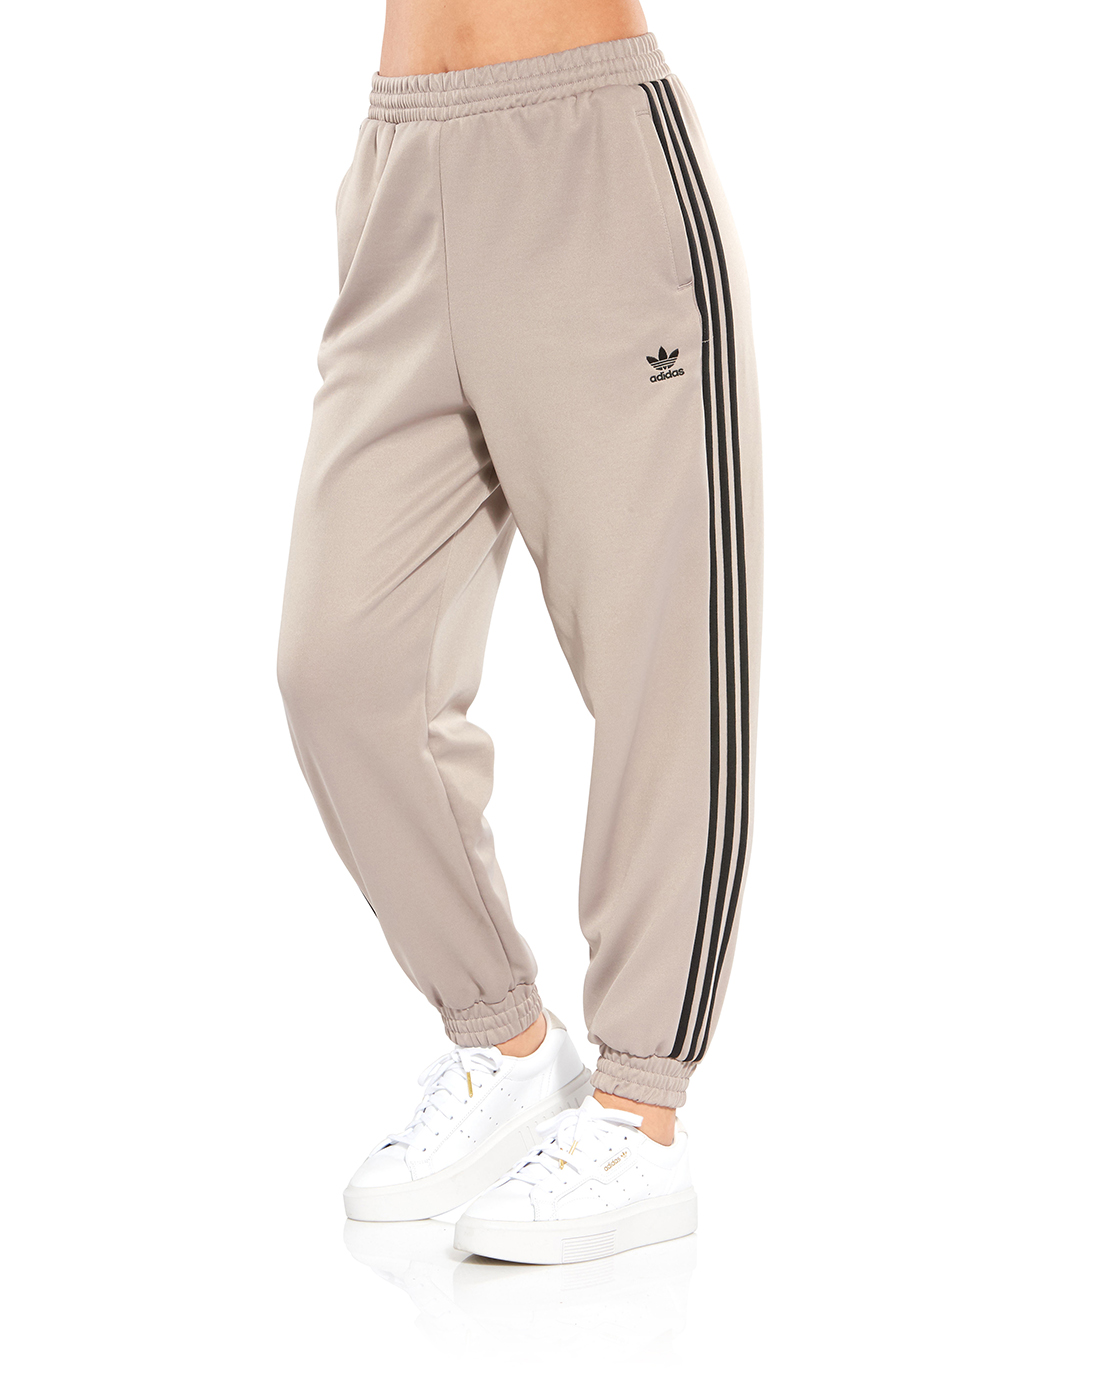 adidas Originals Womens 3-stripes Track Pants - Brown | Life Style Sports IE